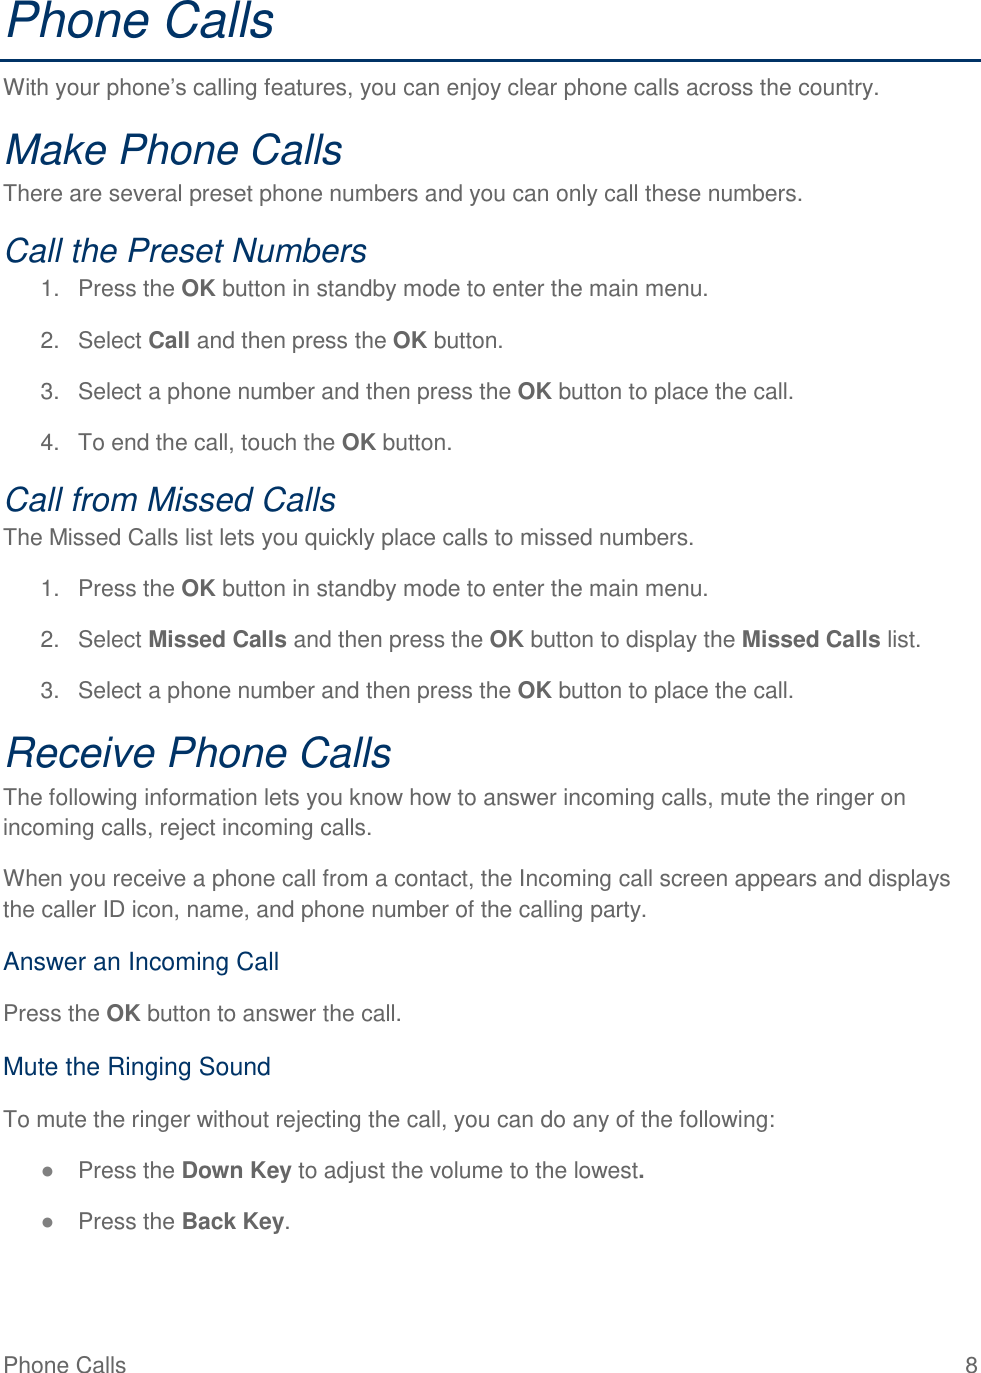 Phone Calls  8 Phone Calls With your phone’s calling features, you can enjoy clear phone calls across the country. Make Phone Calls There are several preset phone numbers and you can only call these numbers. Call the Preset Numbers 1.  Press the OK button in standby mode to enter the main menu. 2.  Select Call and then press the OK button. 3.  Select a phone number and then press the OK button to place the call. 4.  To end the call, touch the OK button. Call from Missed Calls  The Missed Calls list lets you quickly place calls to missed numbers. 1.  Press the OK button in standby mode to enter the main menu. 2.  Select Missed Calls and then press the OK button to display the Missed Calls list. 3.  Select a phone number and then press the OK button to place the call. Receive Phone Calls The following information lets you know how to answer incoming calls, mute the ringer on incoming calls, reject incoming calls. When you receive a phone call from a contact, the Incoming call screen appears and displays the caller ID icon, name, and phone number of the calling party.  Answer an Incoming Call Press the OK button to answer the call. Mute the Ringing Sound To mute the ringer without rejecting the call, you can do any of the following: ● Press the Down Key to adjust the volume to the lowest. ● Press the Back Key. 